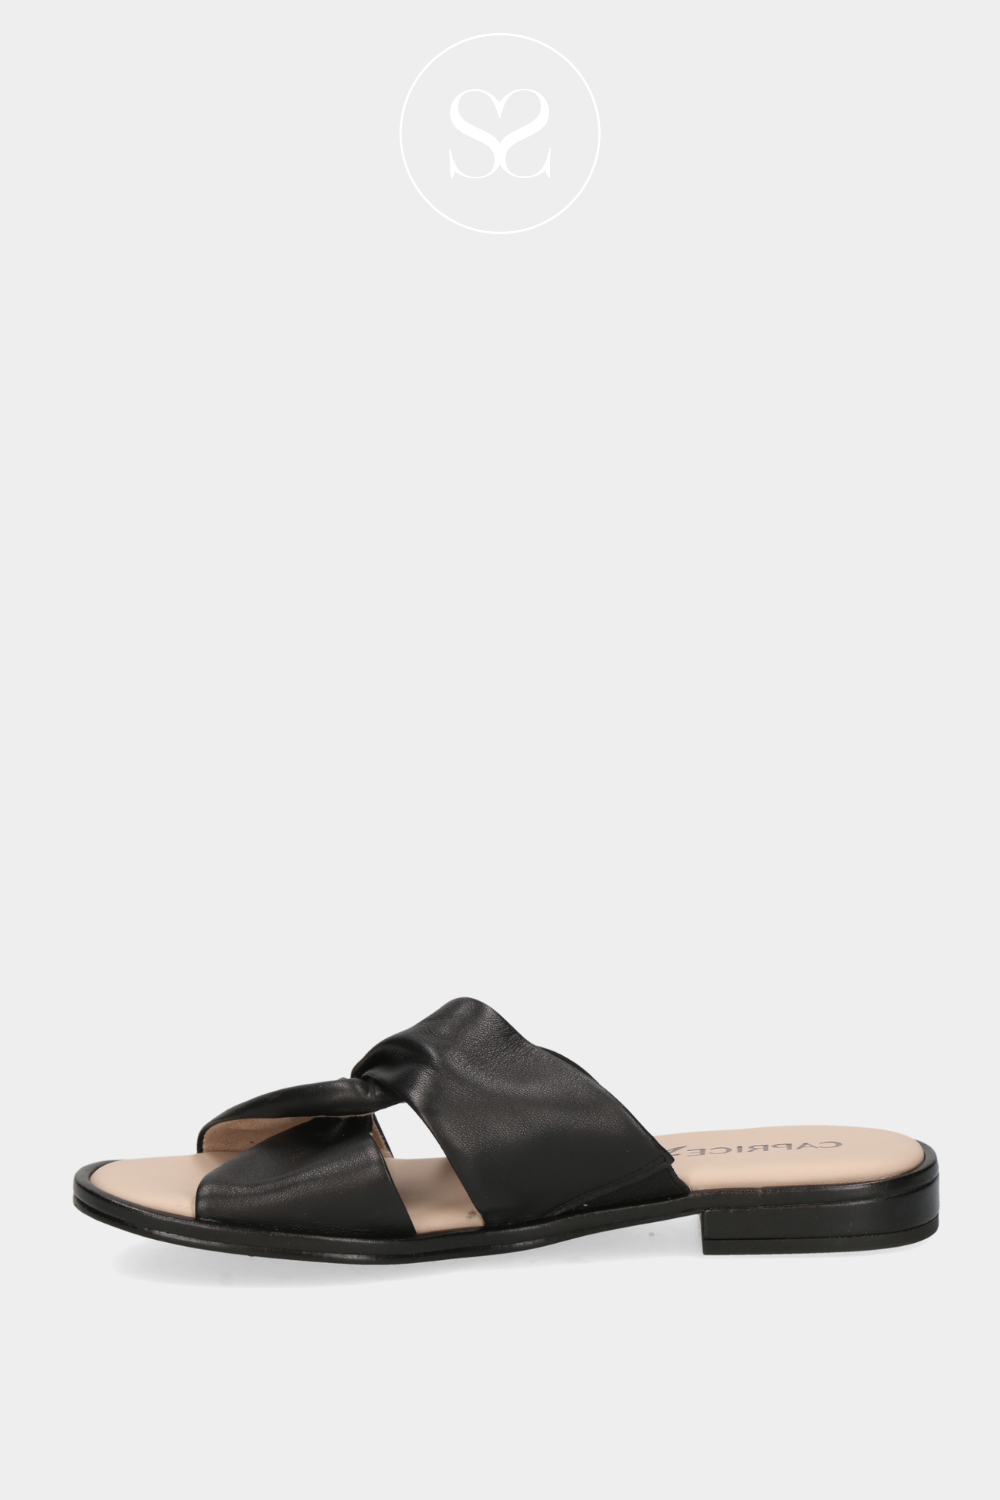 CAPRICE 9-27100-42 BLACK LEATHER FLAT SLIP ON SLIDERS WITH CRISS CROSS STRAPS